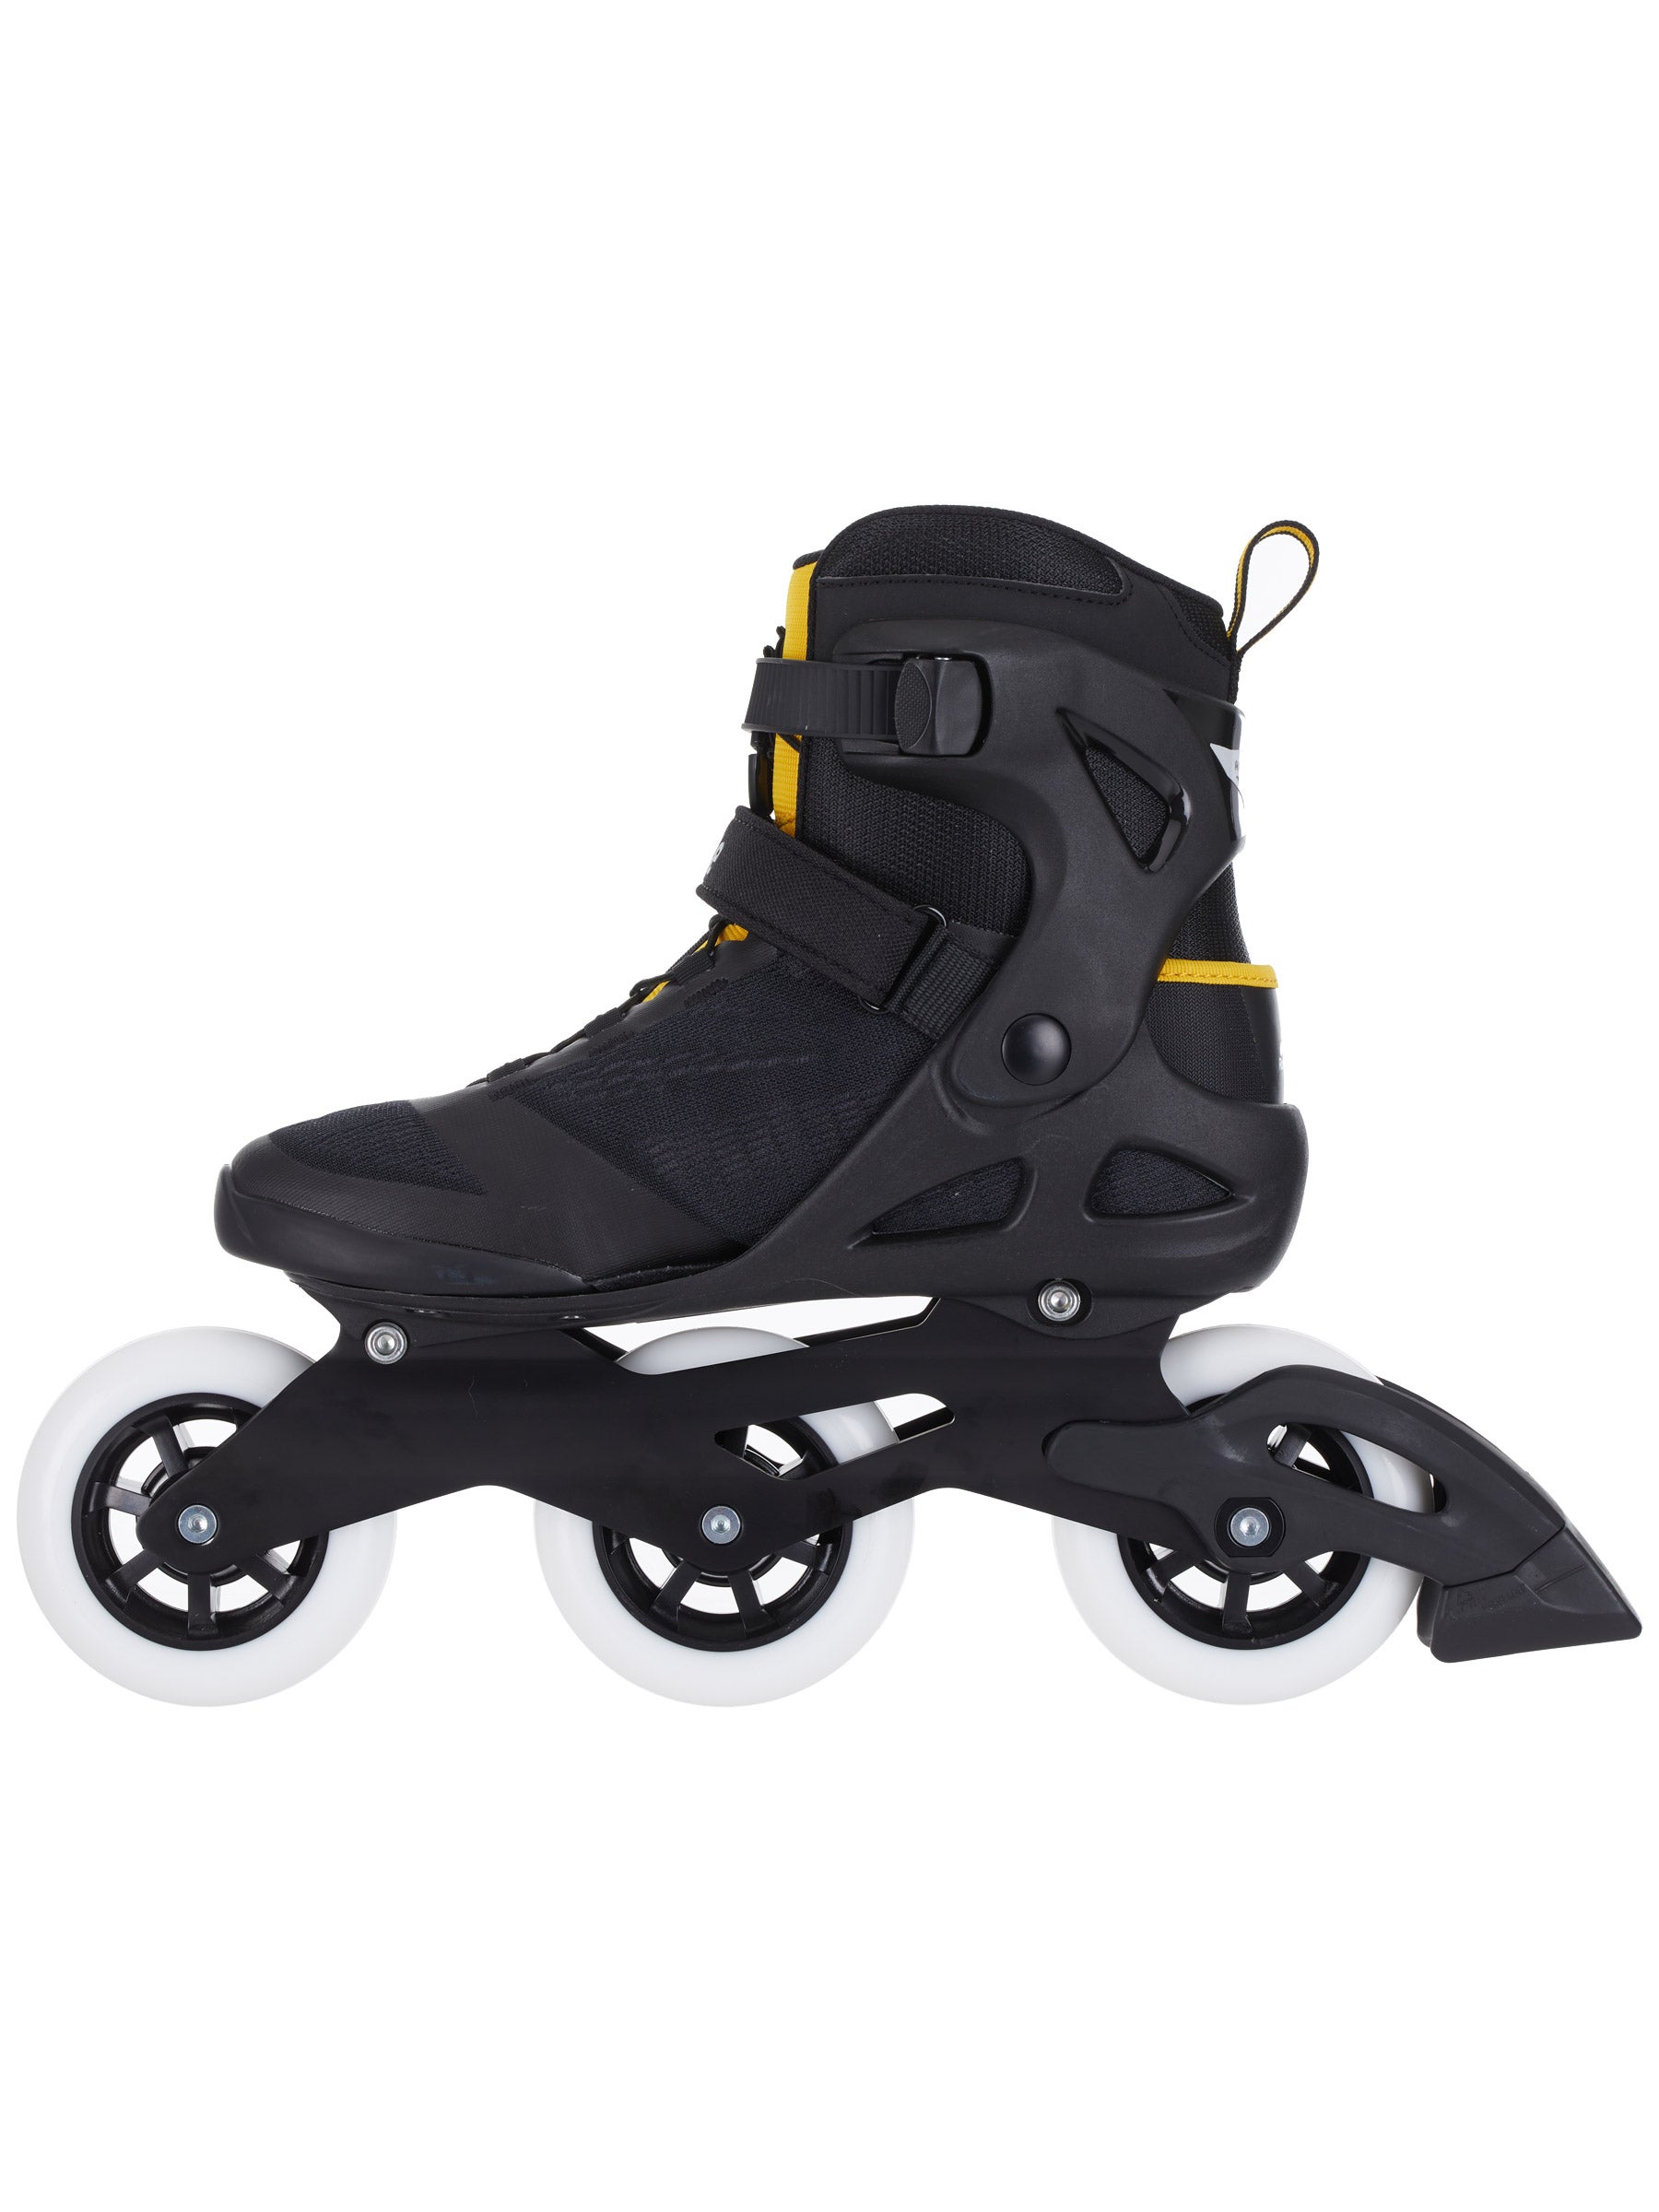 New Rollerblade Macroblade 100 3WD Men's Inline Skates Shoes Multiple Size 